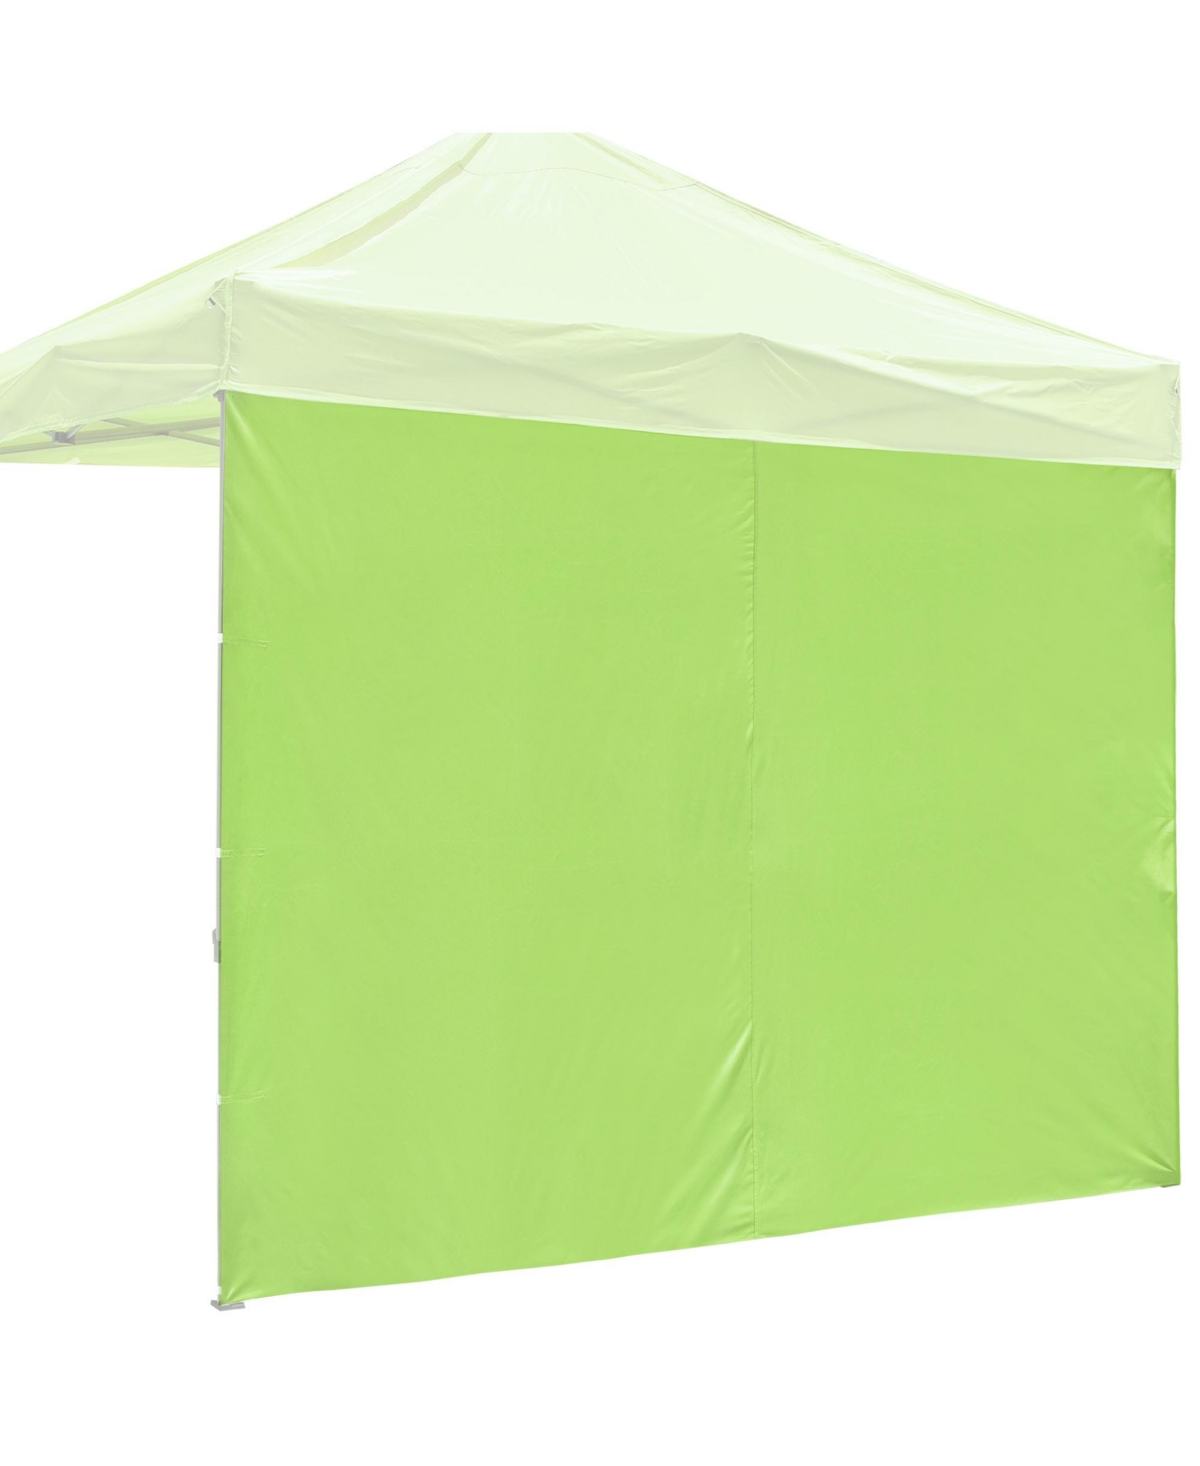 Sidewall UV30+ Fits 10x10ft Canopy Outdoor Picnic 1 Piece Outdoor - Green